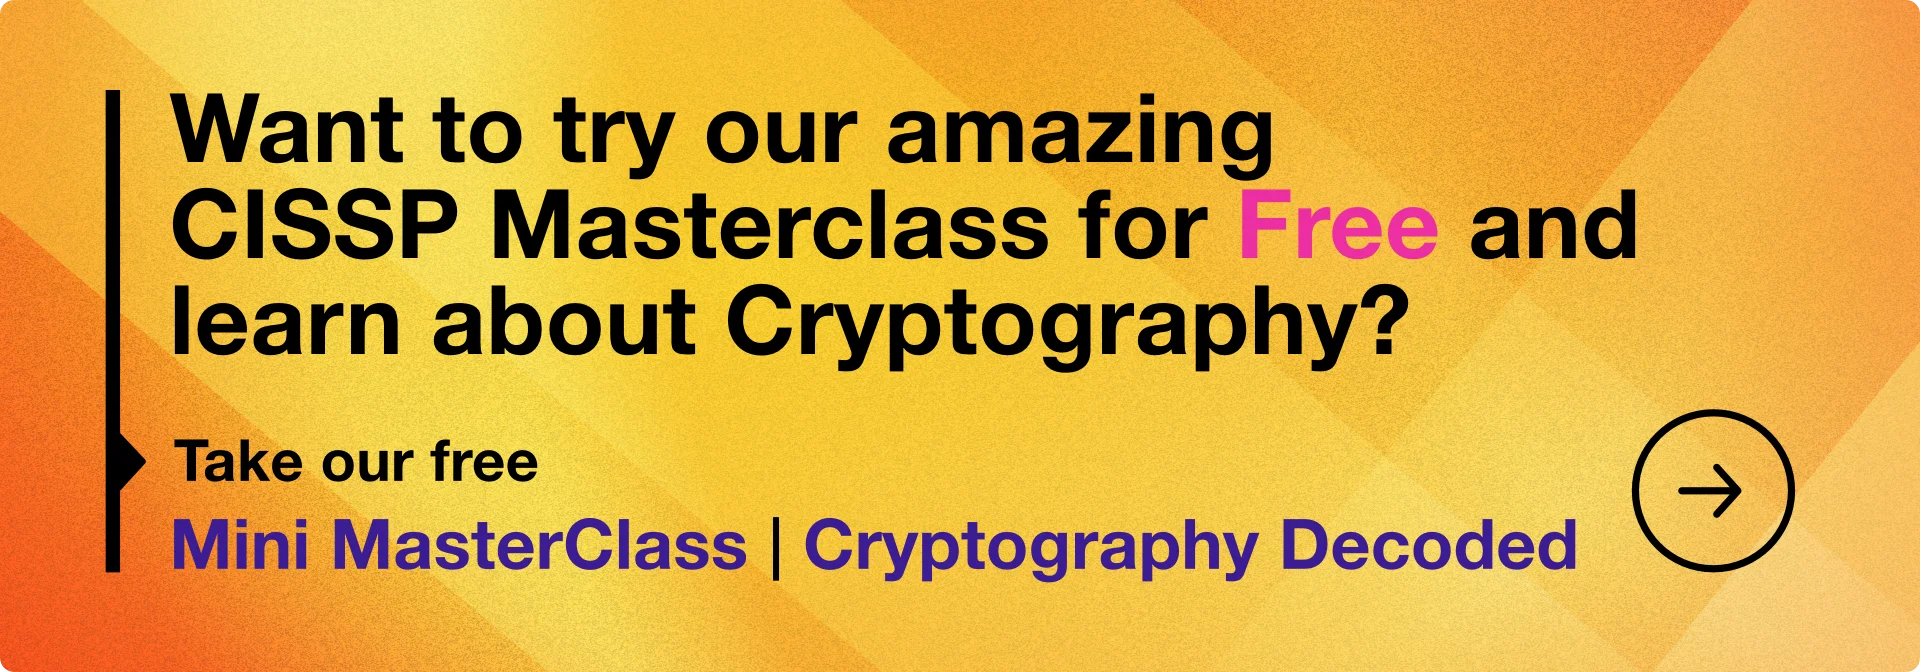 Image banner for cryptography mini masterclass - Destination Certification